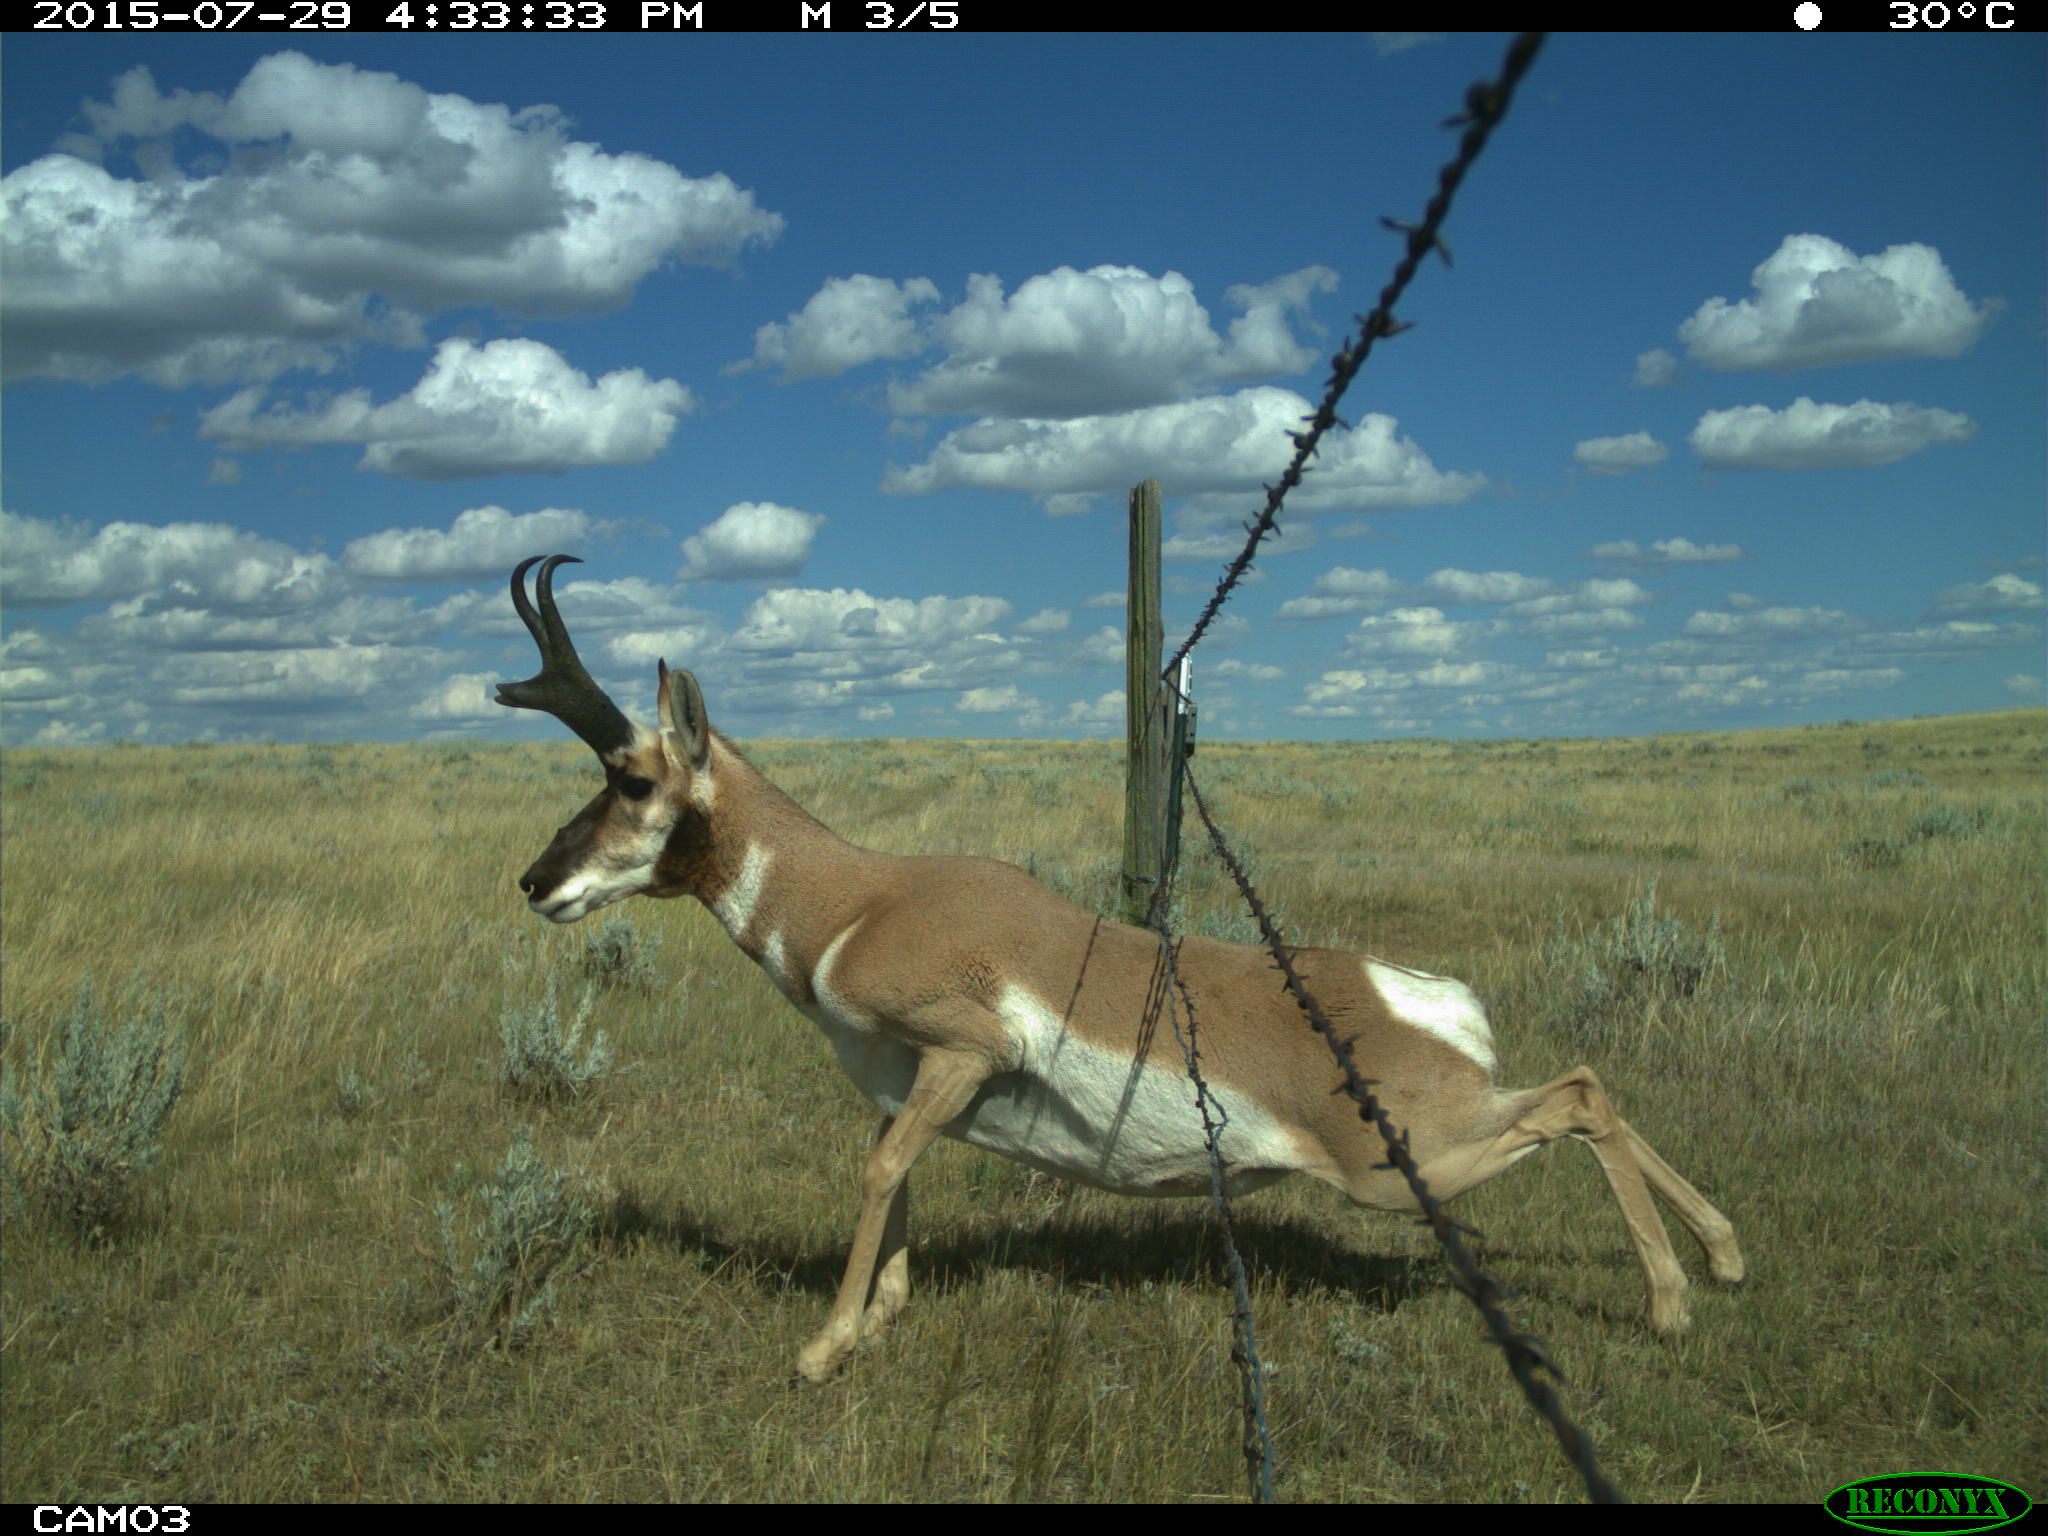 3 smoothwire buck How Can the Pronghorn Cross the Fence?